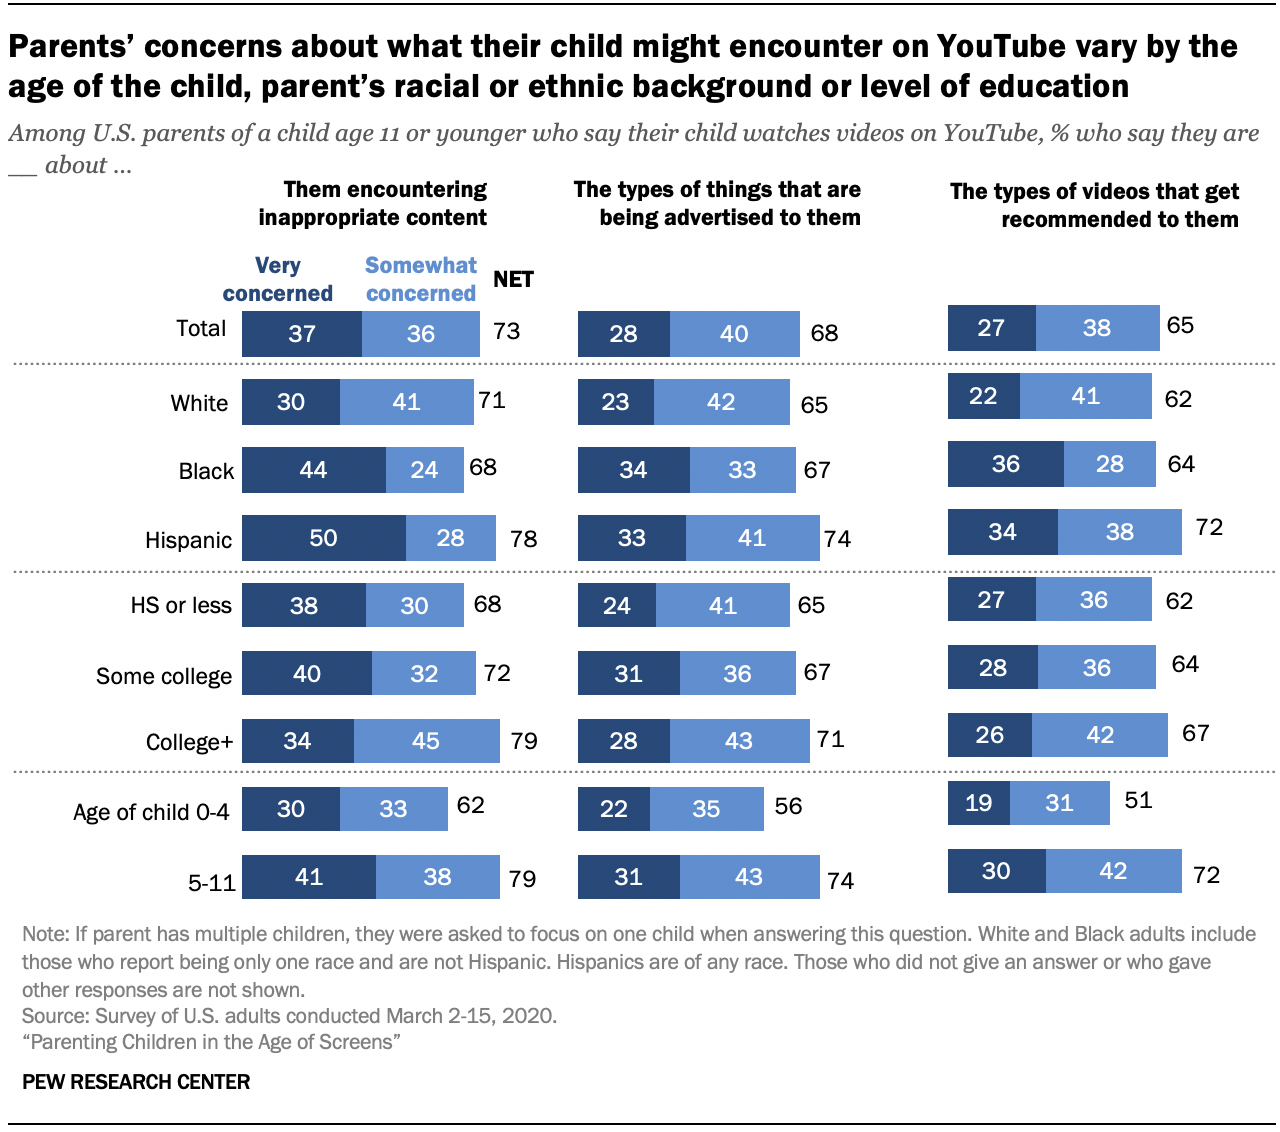 Chart shows parents’ concerns about what their child might encounter on YouTube vary by the age of the child, parent’s racial or ethnic background or level of education